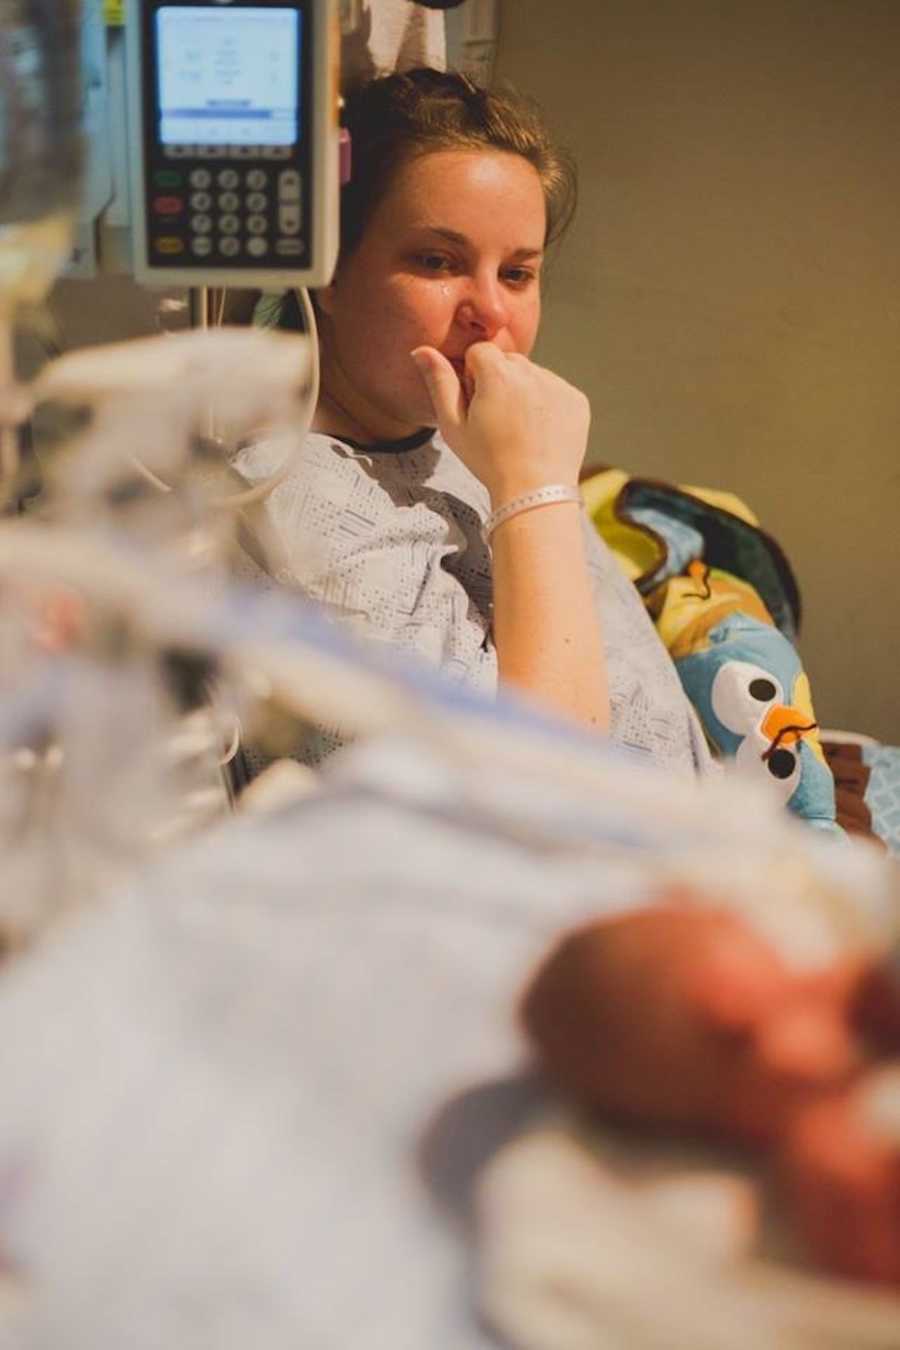 A mom watches tearfully as her newborn is treated in the hospital.